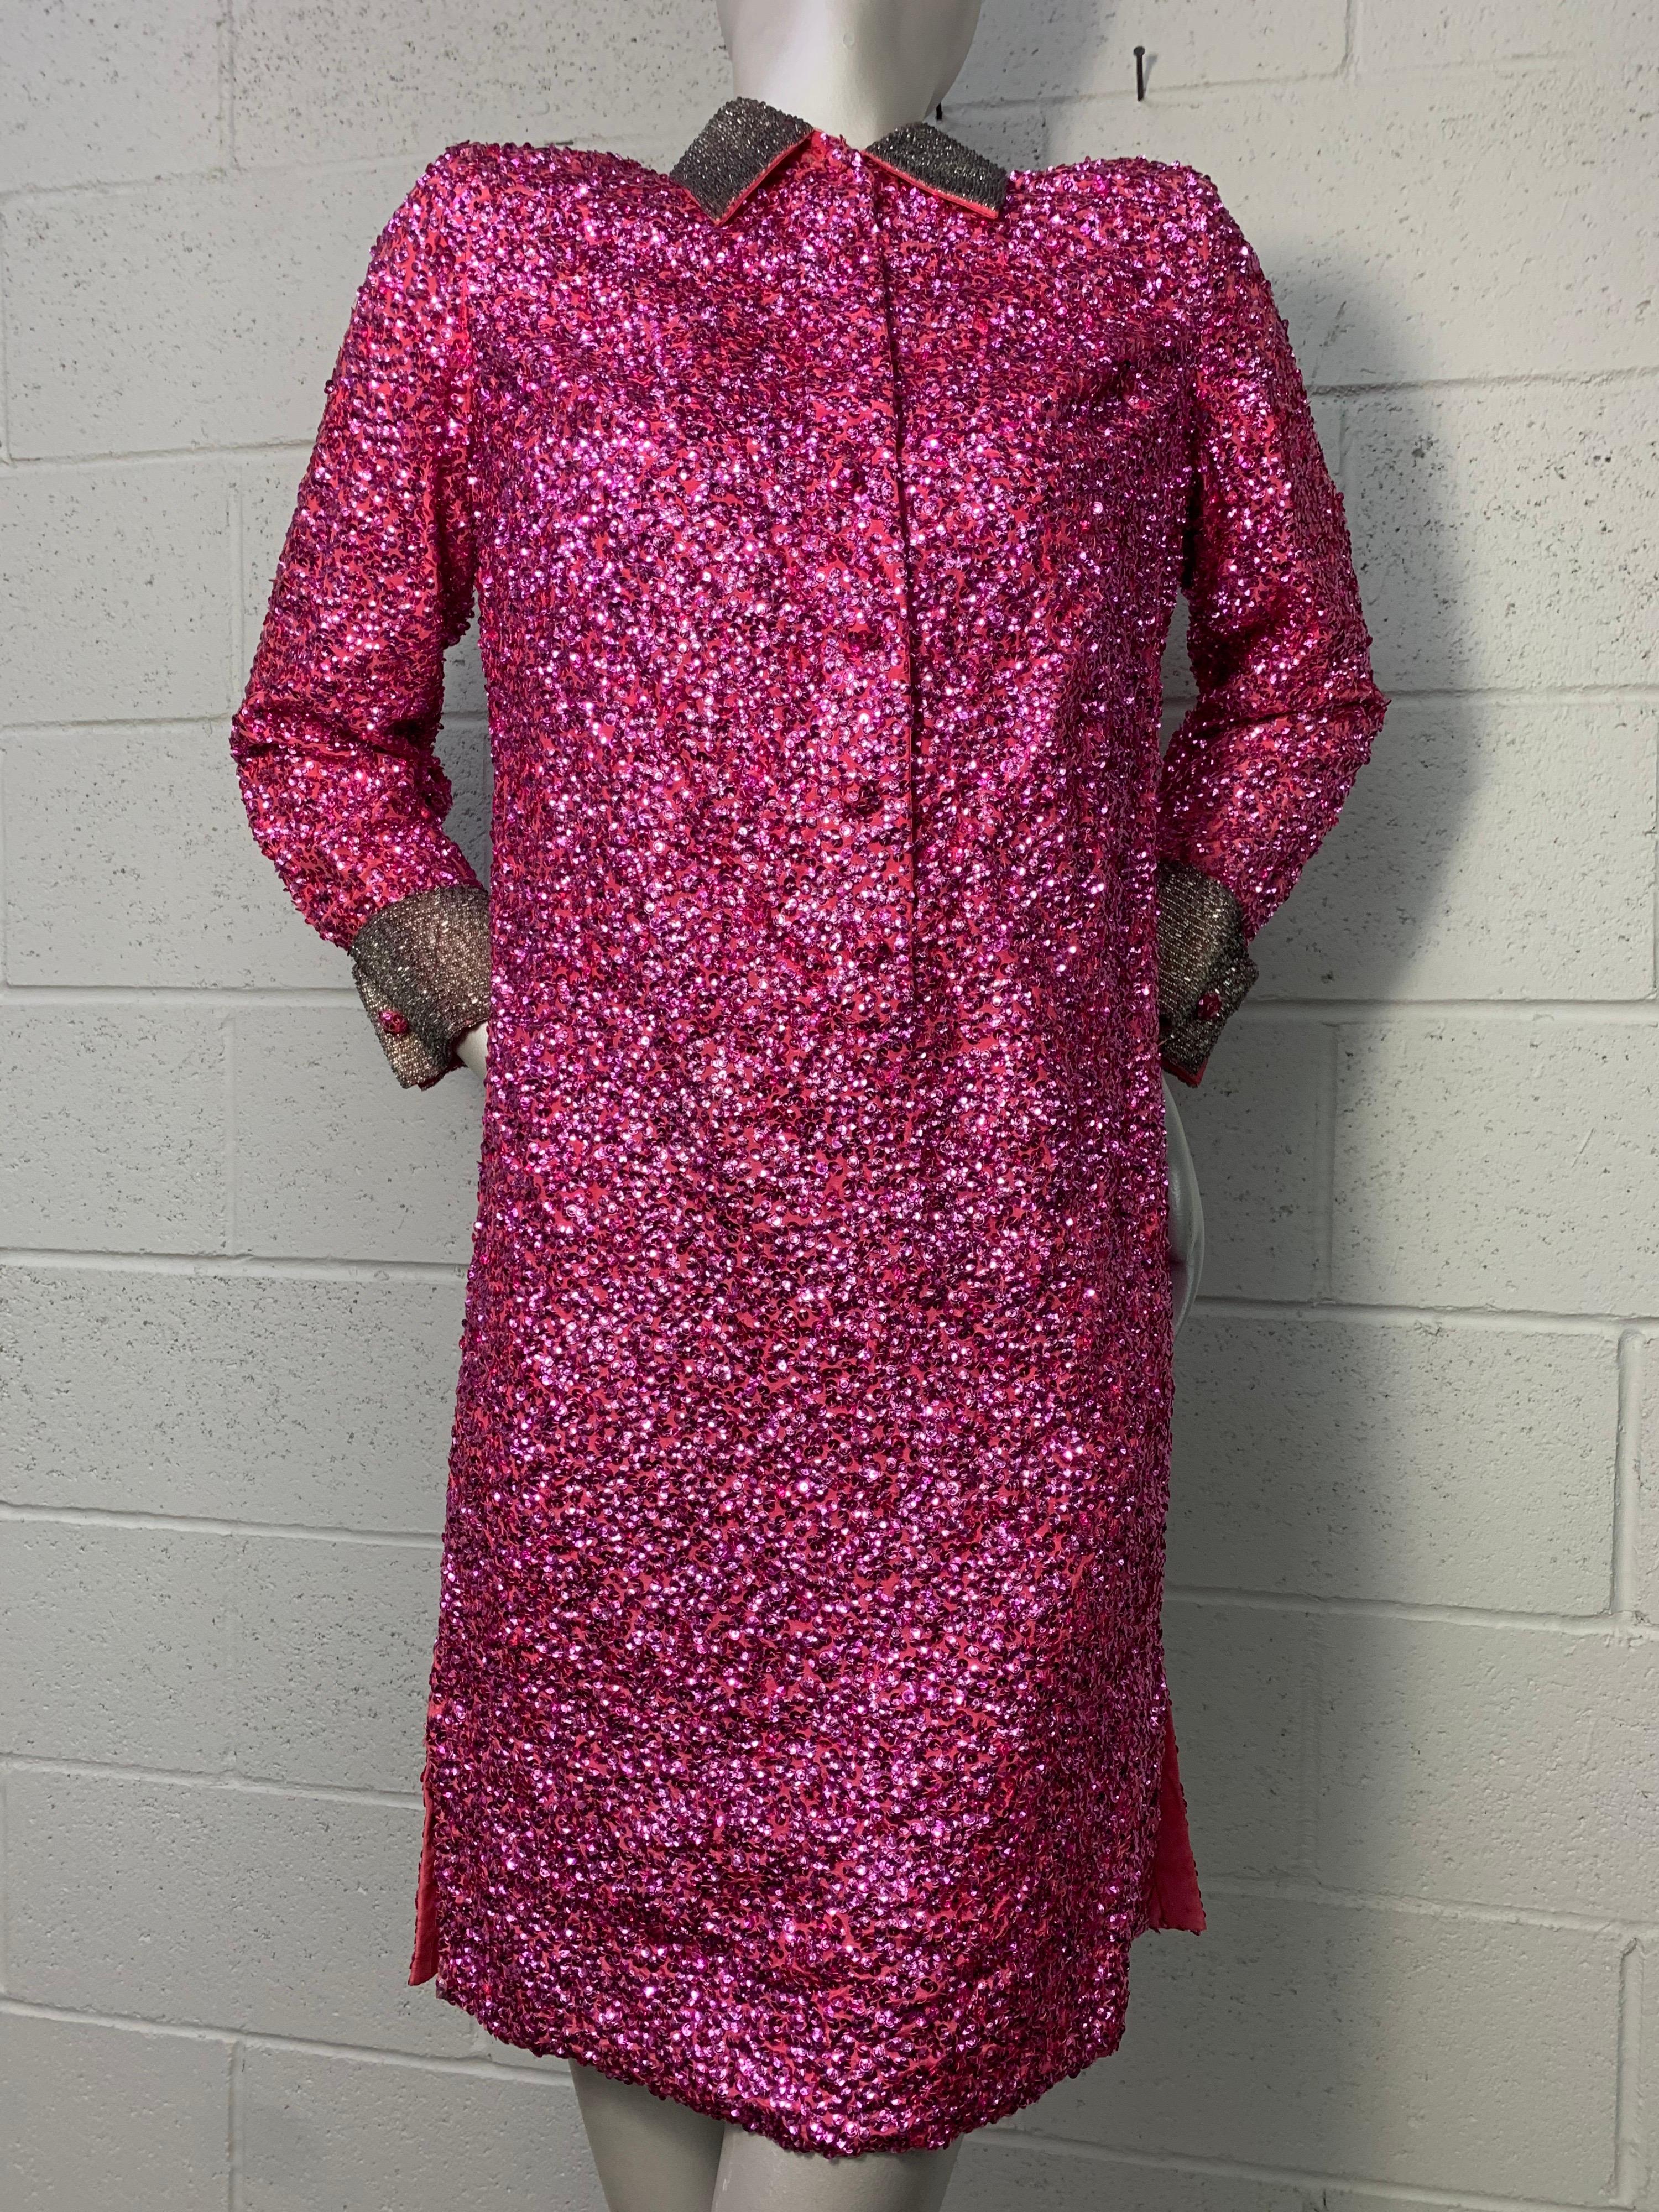 A stunning 1960s vivid fuchsia sequin encrusted rayon taffeta cocktail dress: Mod glamour at its best! Back overlaps with snap closures at back. Button cufflinks on beaded cuffs. Side vent. Made in Hong Kong by hand. Size 6. 